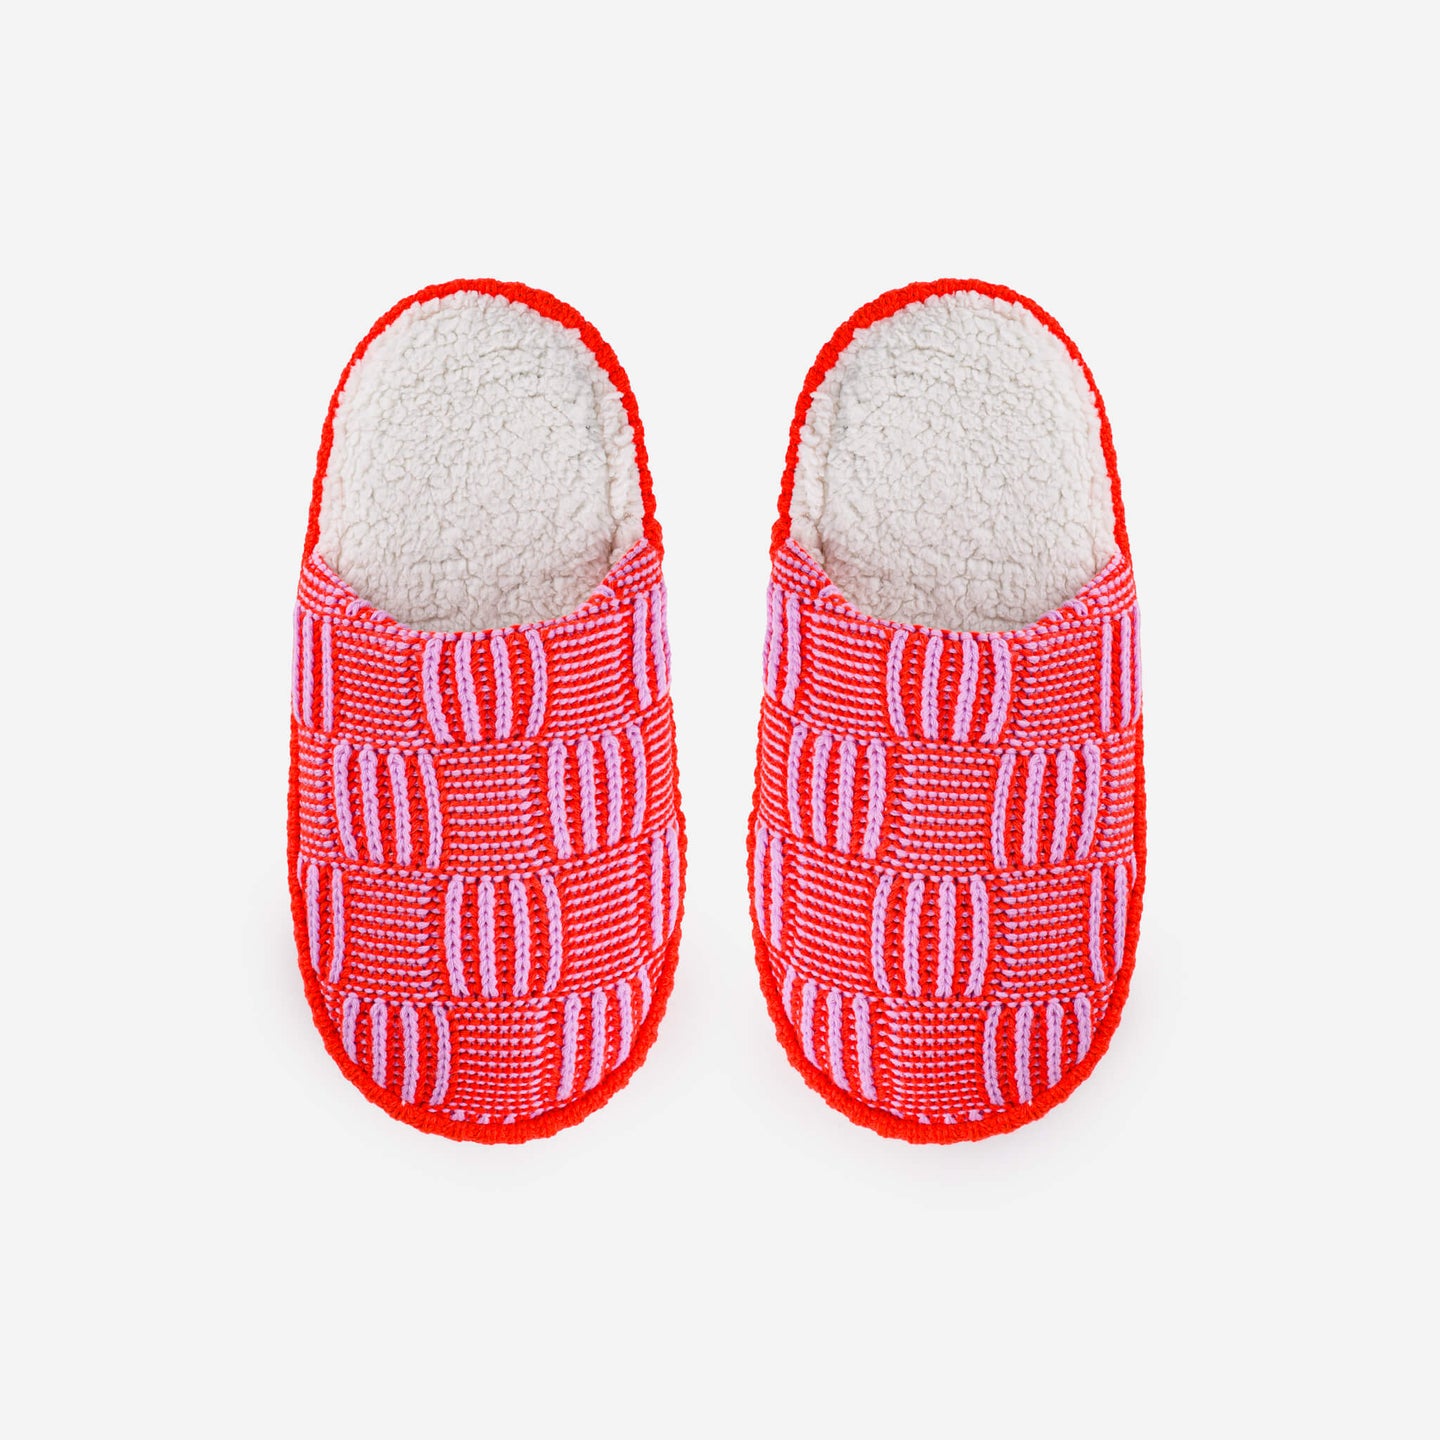 Chunky Checkerboard Slide Slippers Spa Backless Textured Knit Slippers Cozy Washable